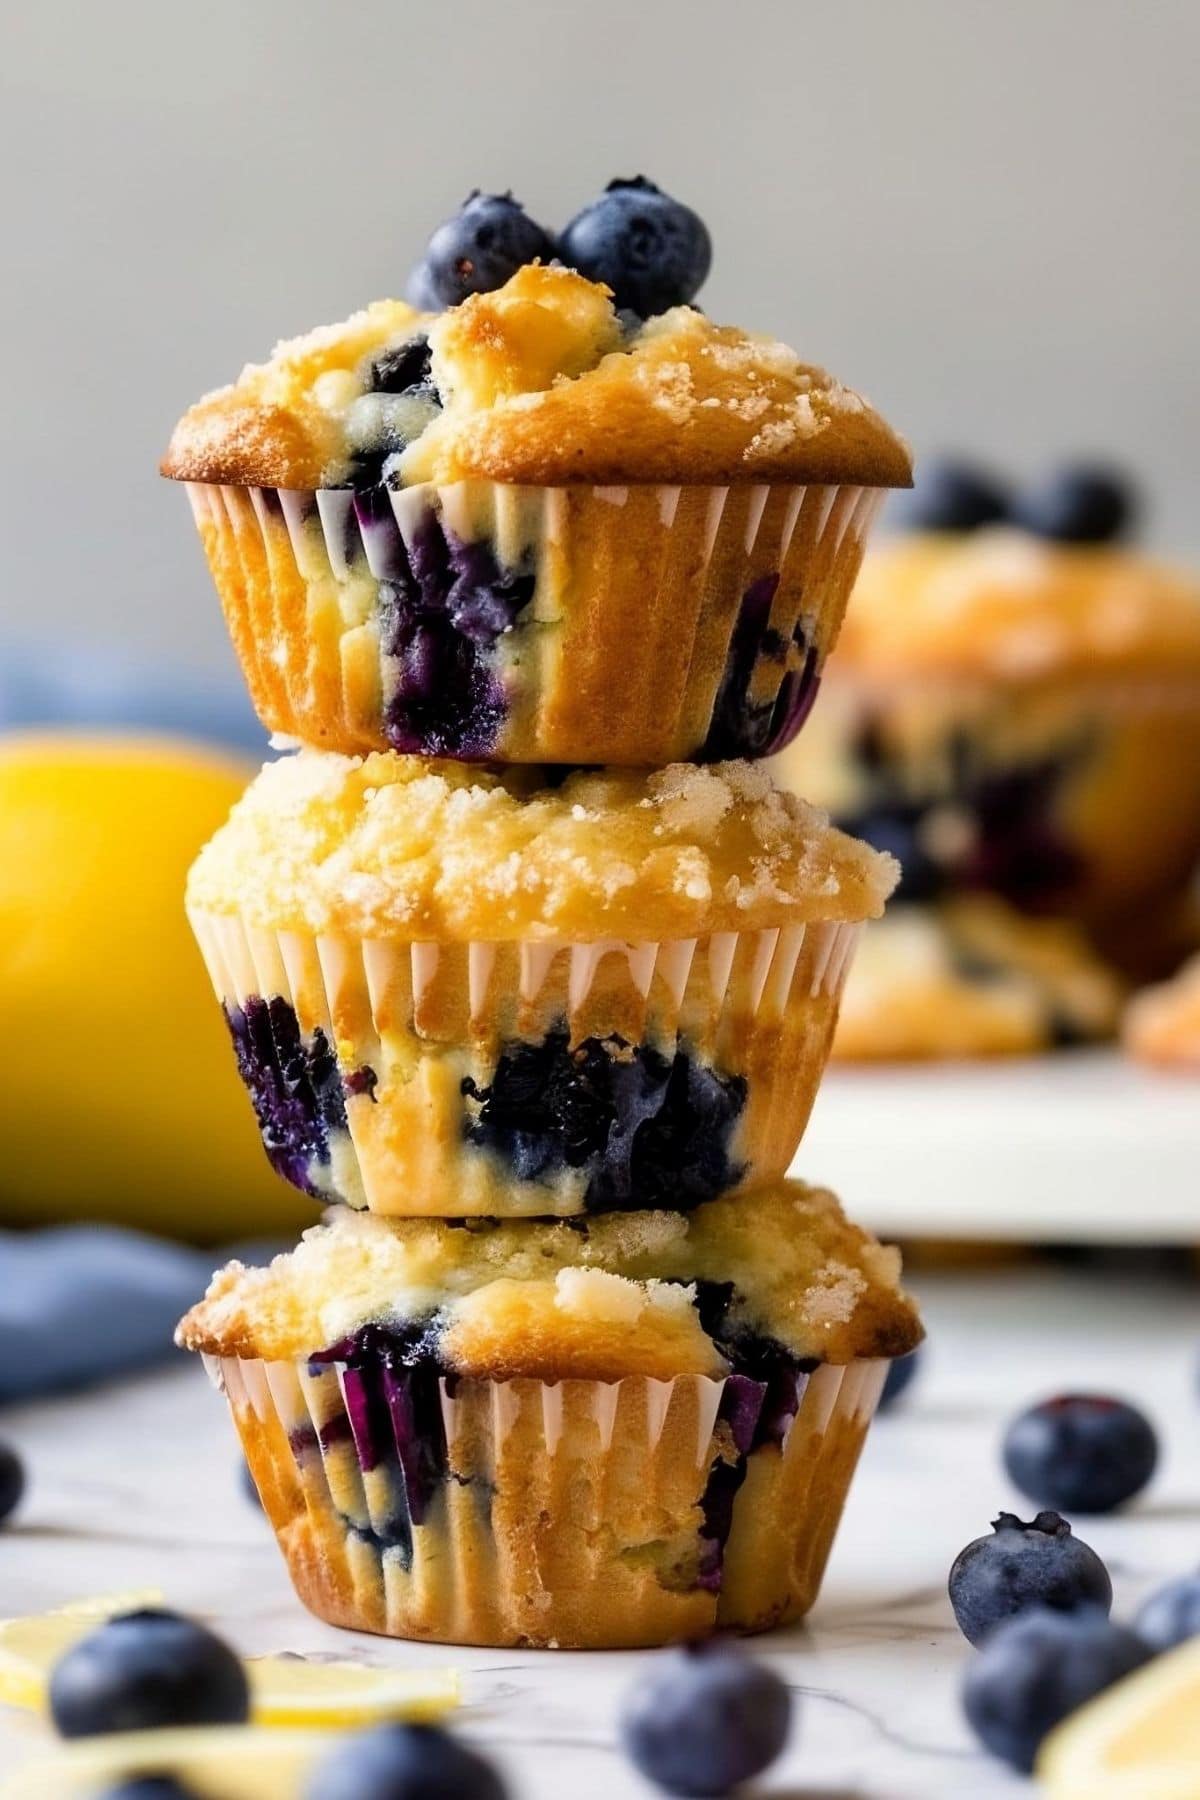 Three Stacked Lemon Blueberry Muffins on a White Marble Table with Blueberries Around the Muffins